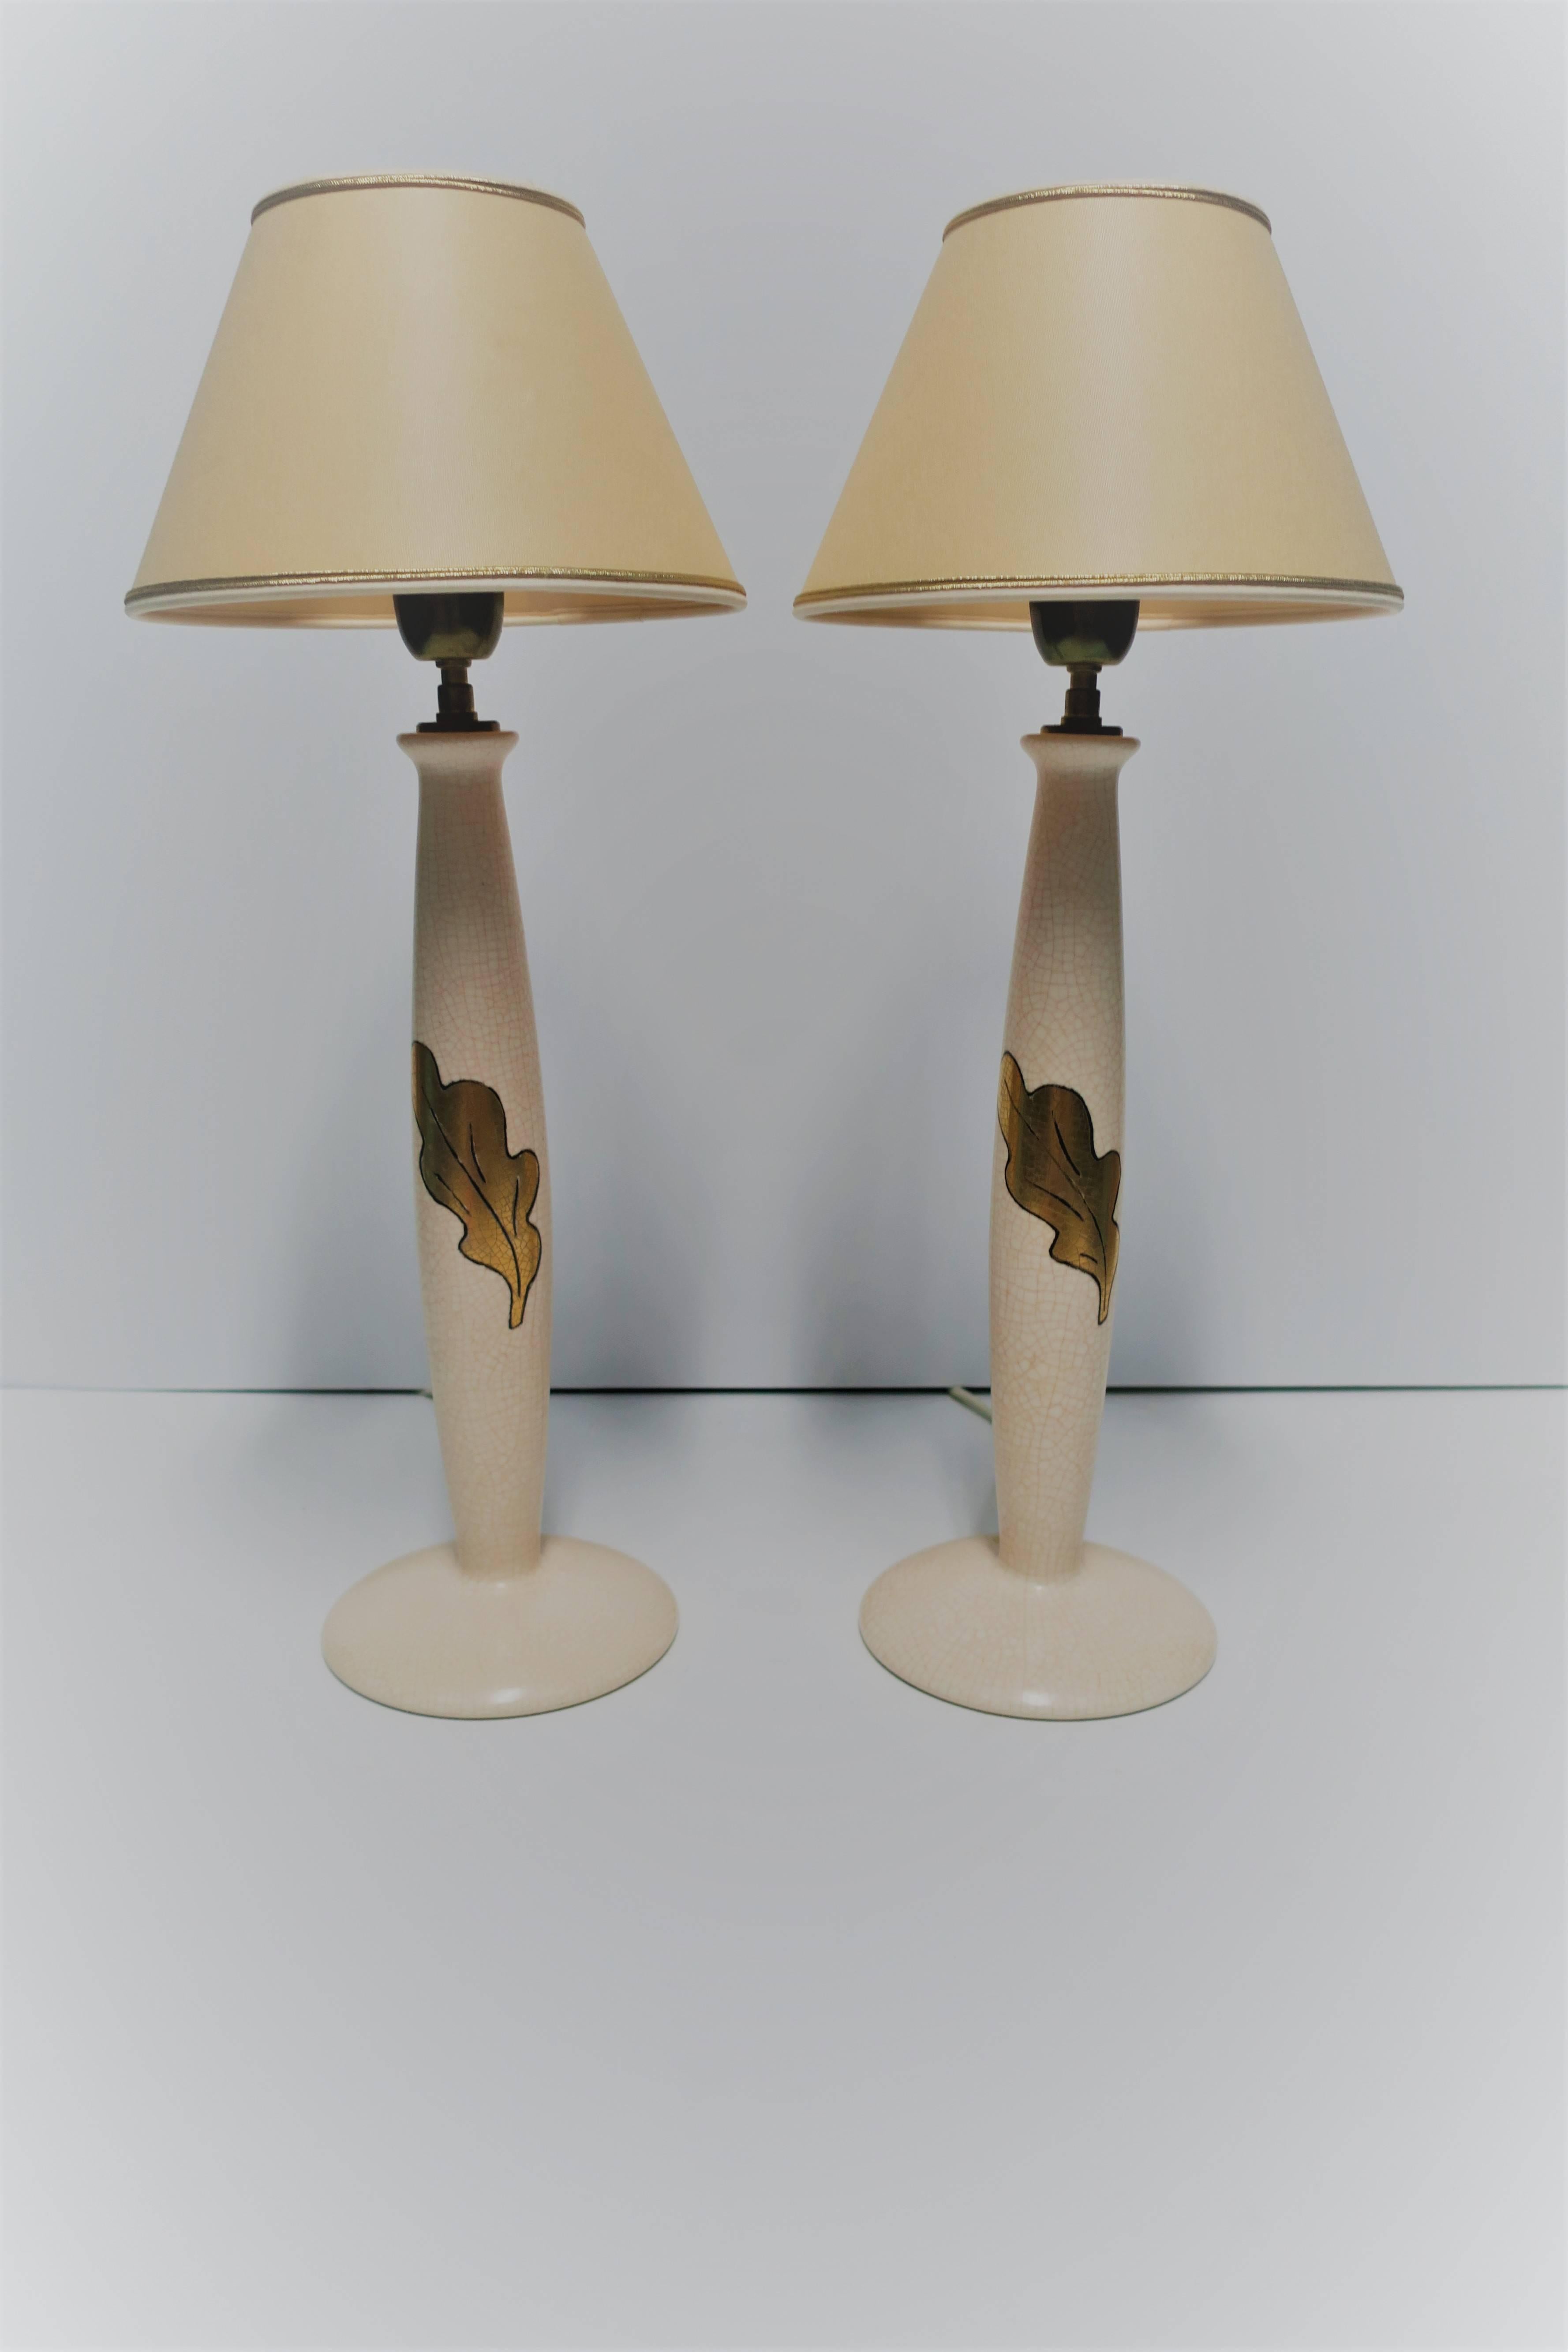 A beautiful pair of French desk or table lamps with gold acanthus leaf design. Lamps are a neutral/flesh tone/very light pink-peach hue with a 'crackle' ceramic and gold acanthus leaf outlined in black on front. Marked 